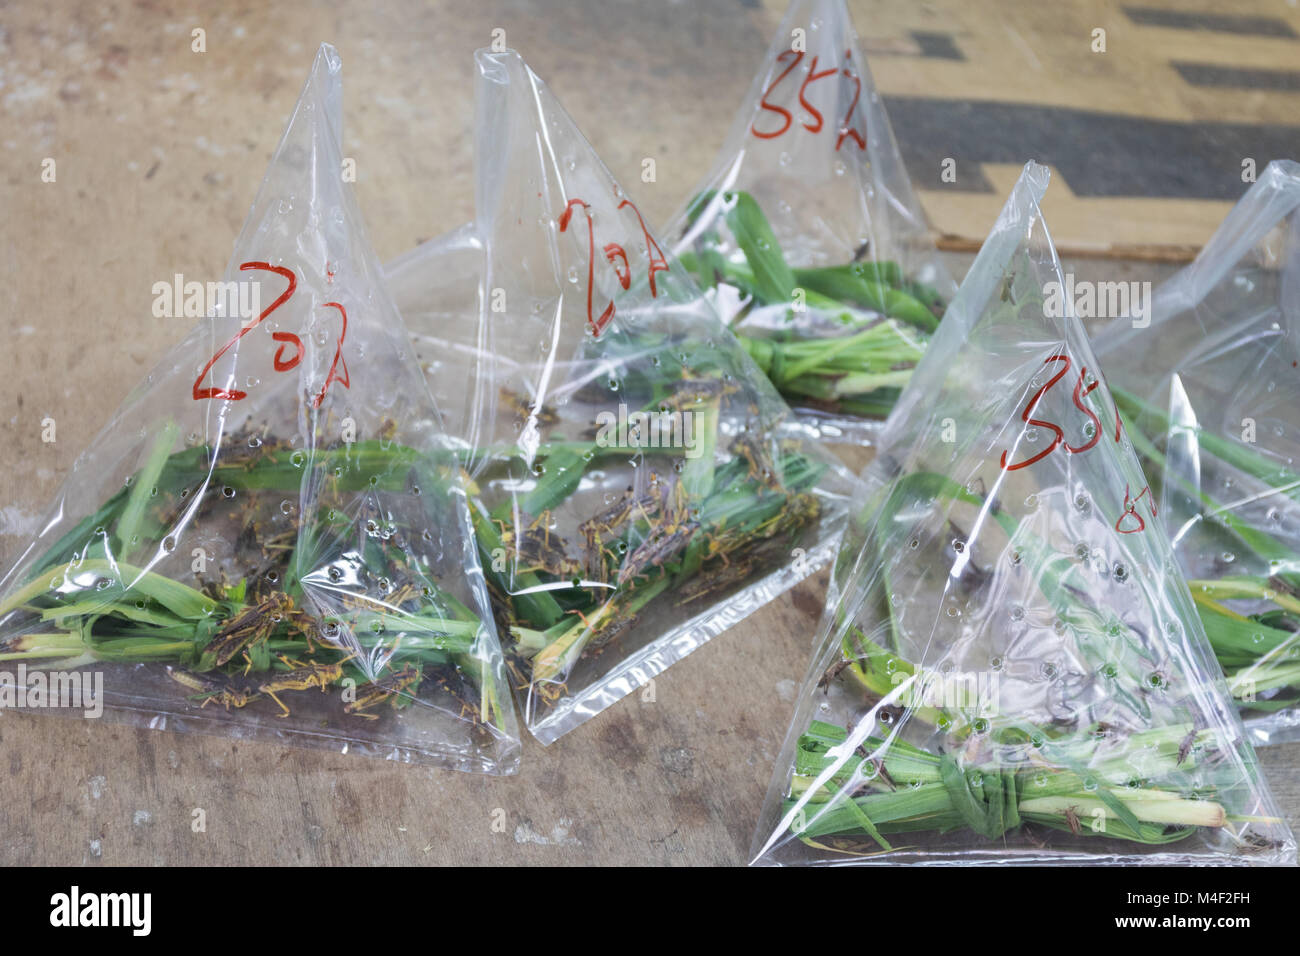 Grasshoppers in Bags Stock Photo